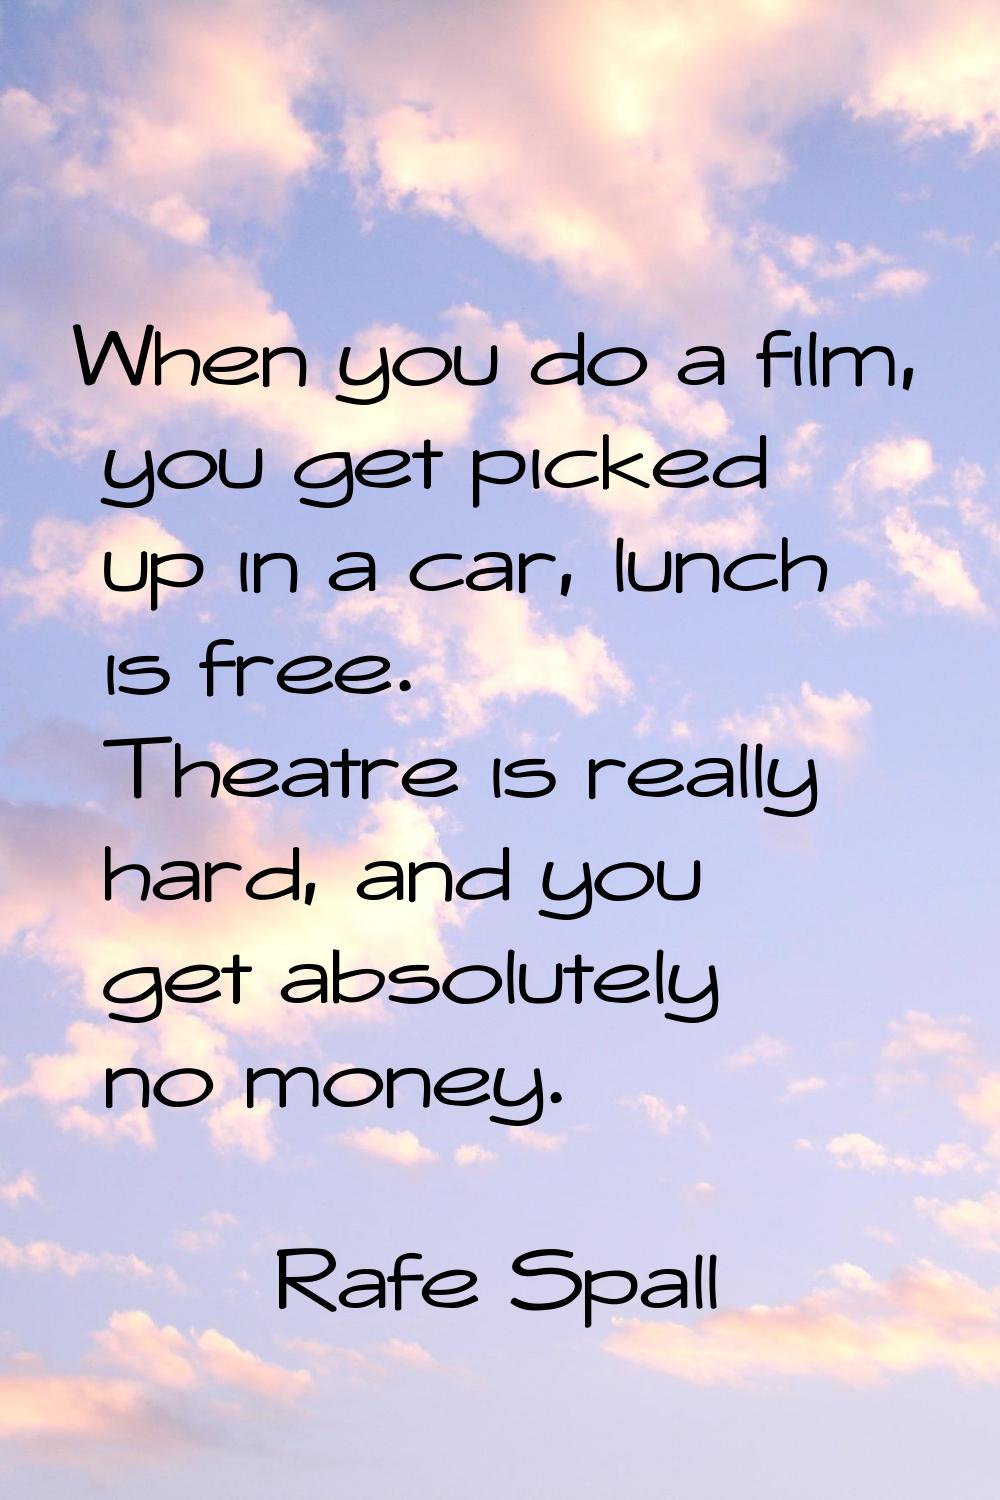 When you do a film, you get picked up in a car, lunch is free. Theatre is really hard, and you get 